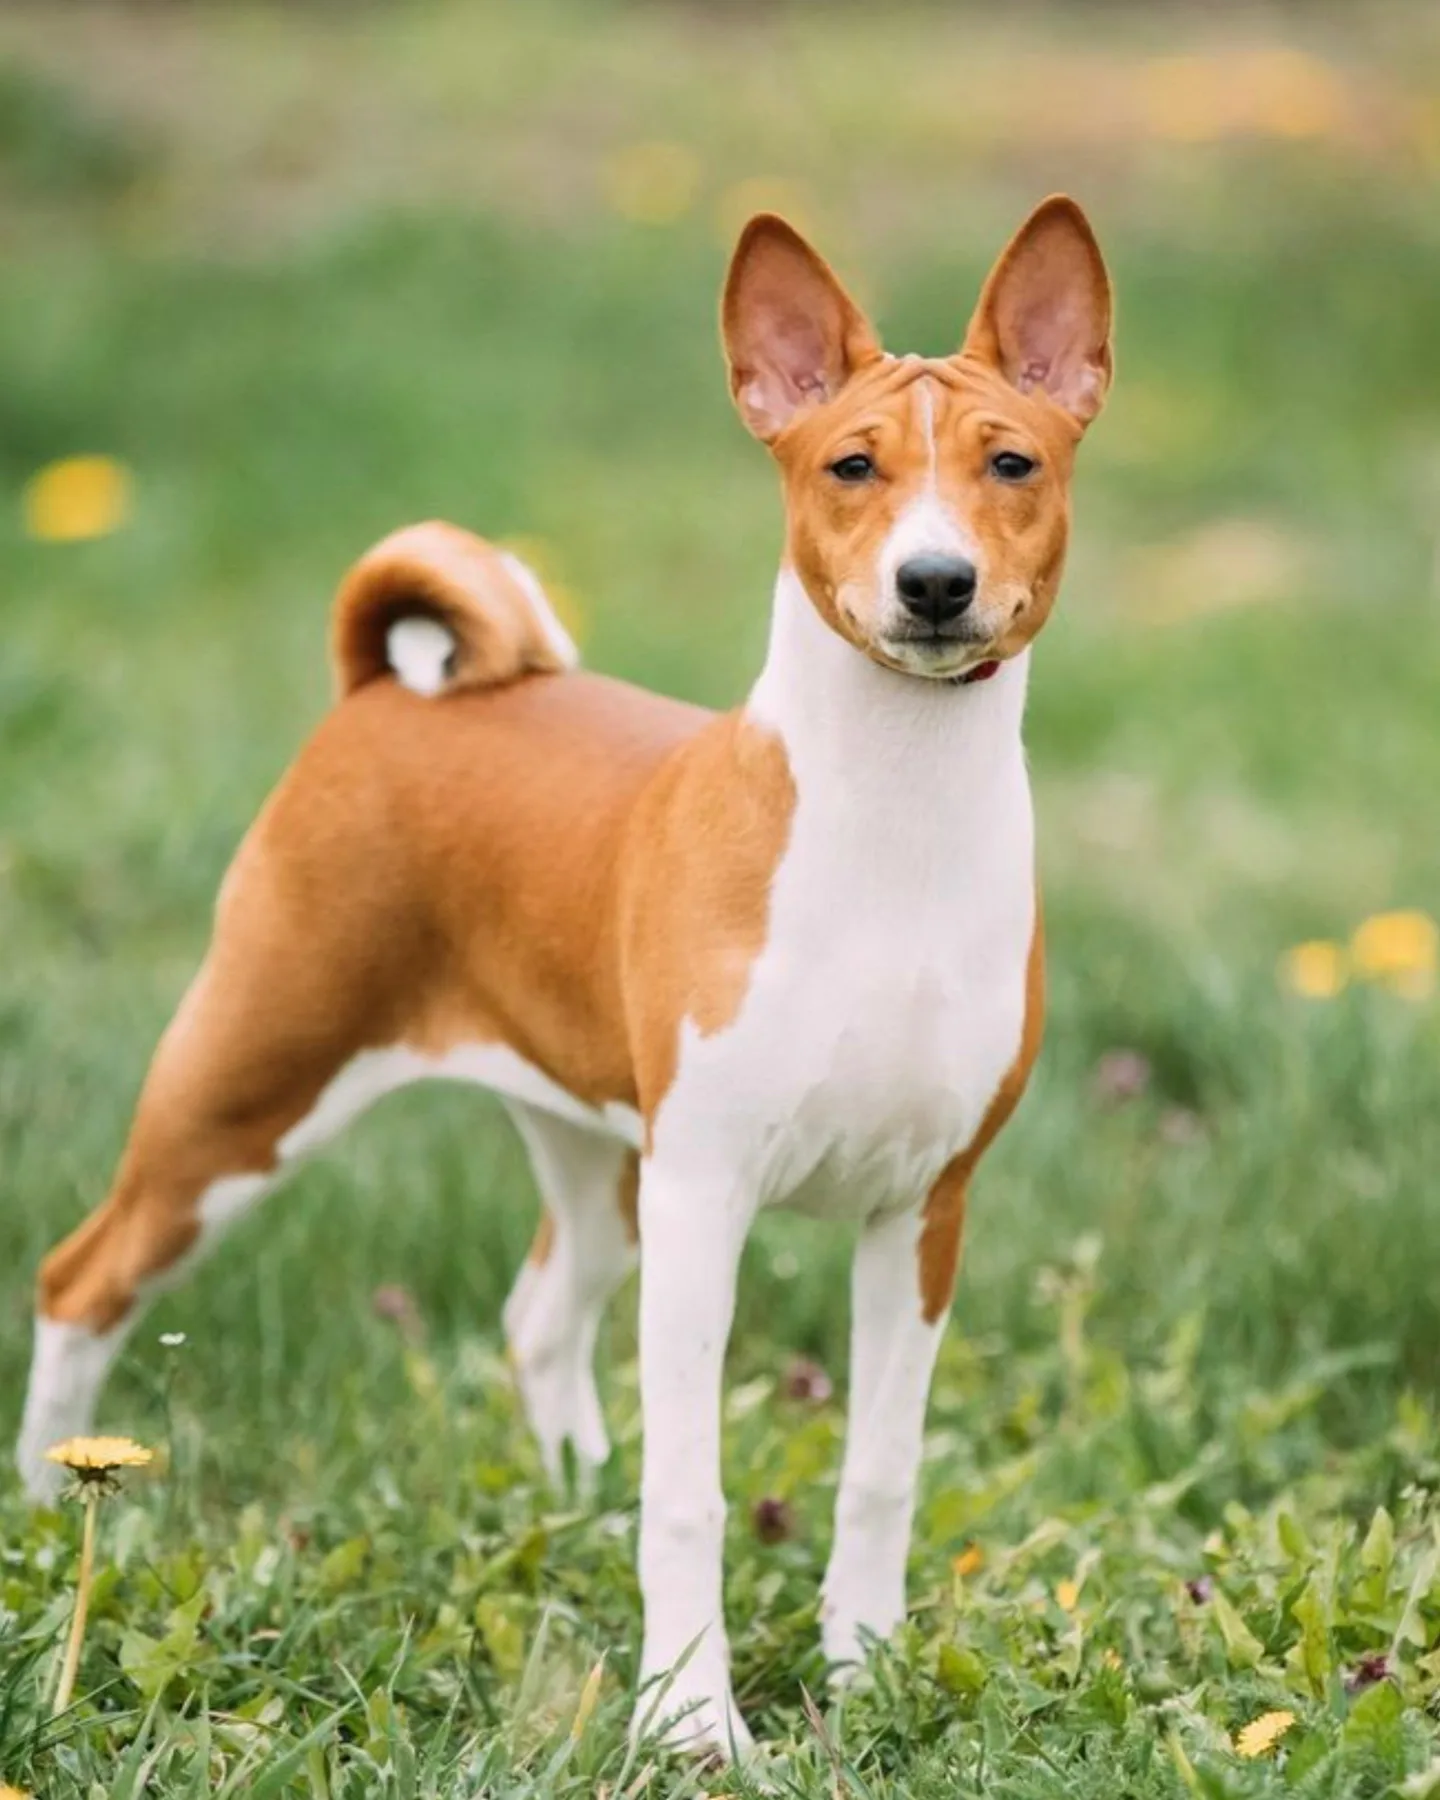 A hunting dog breed in its full potential called the Basenji